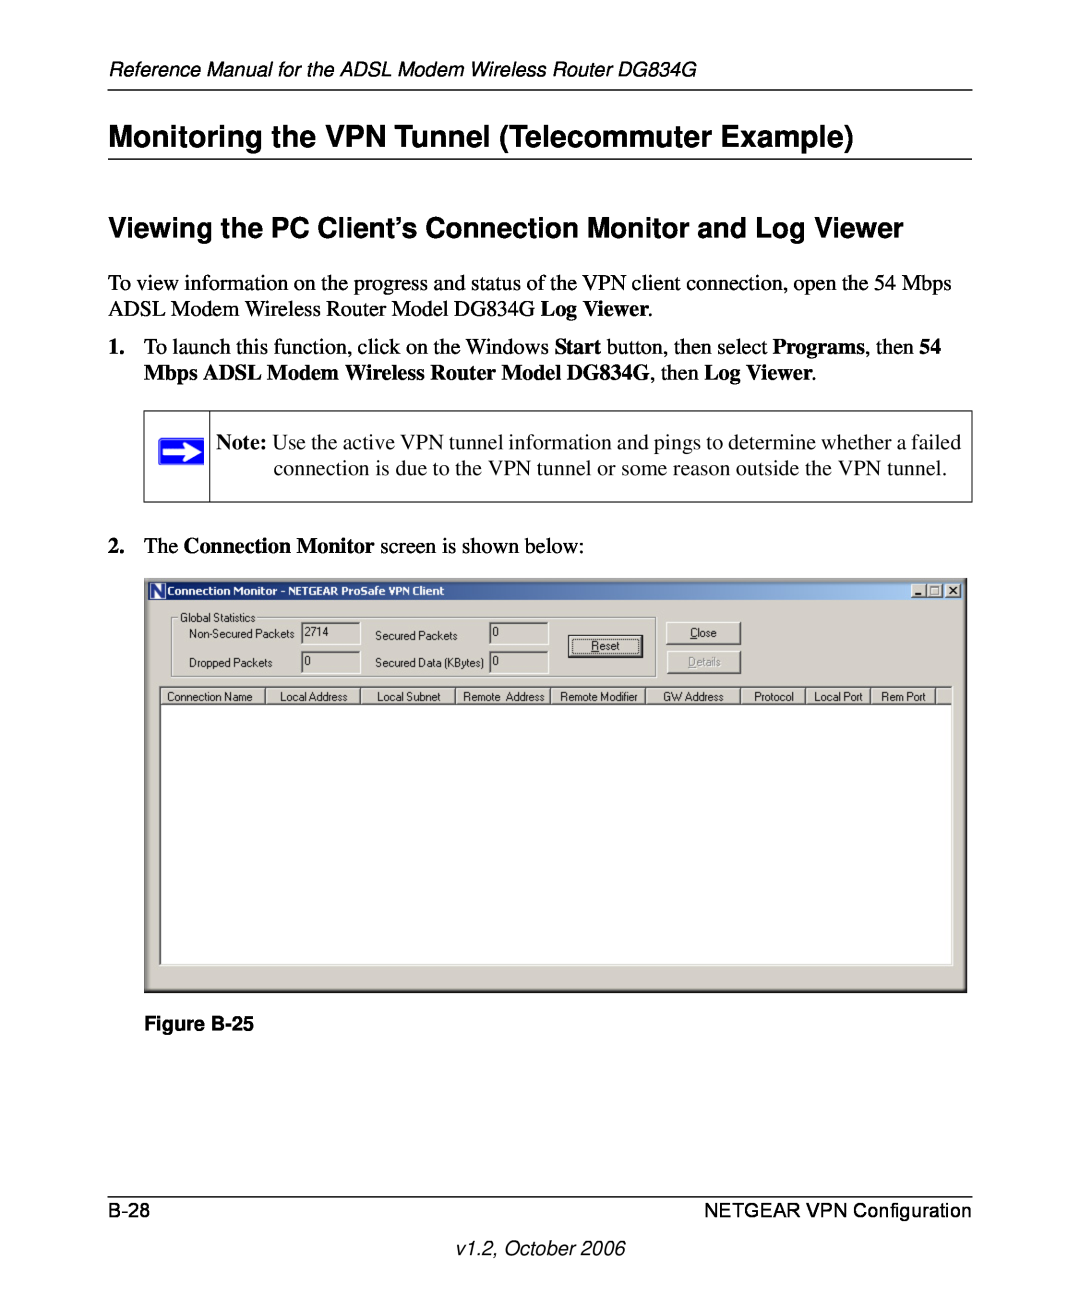 NETGEAR DG834G Monitoring the VPN Tunnel Telecommuter Example, Viewing the PC Client’s Connection Monitor and Log Viewer 